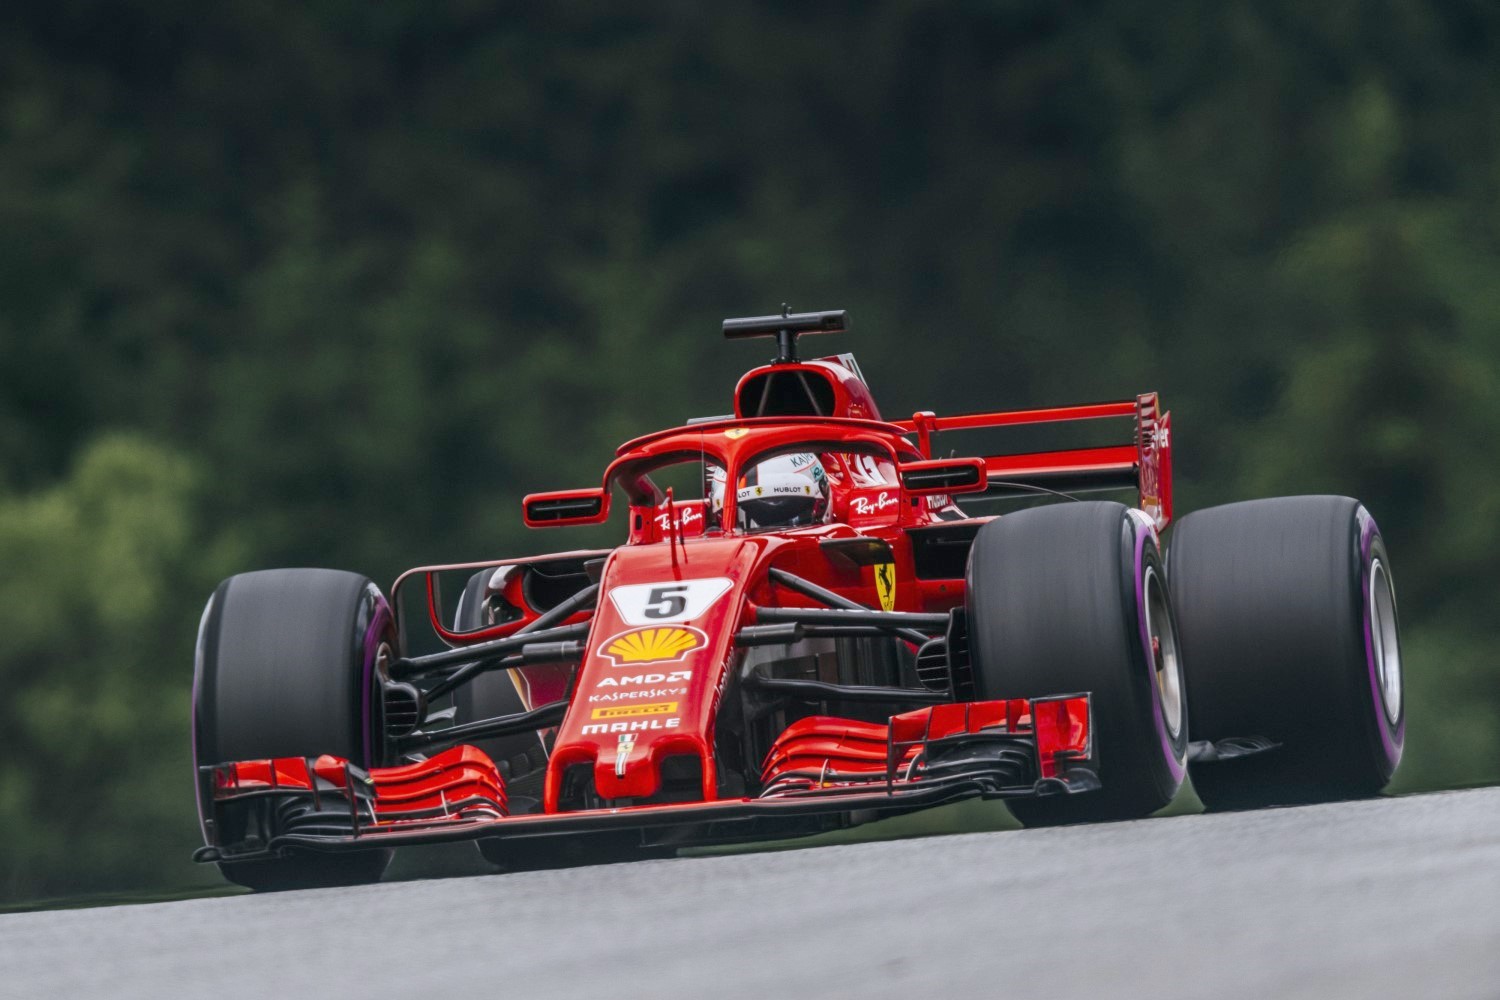 Vettel was not going to risk blistering his tires